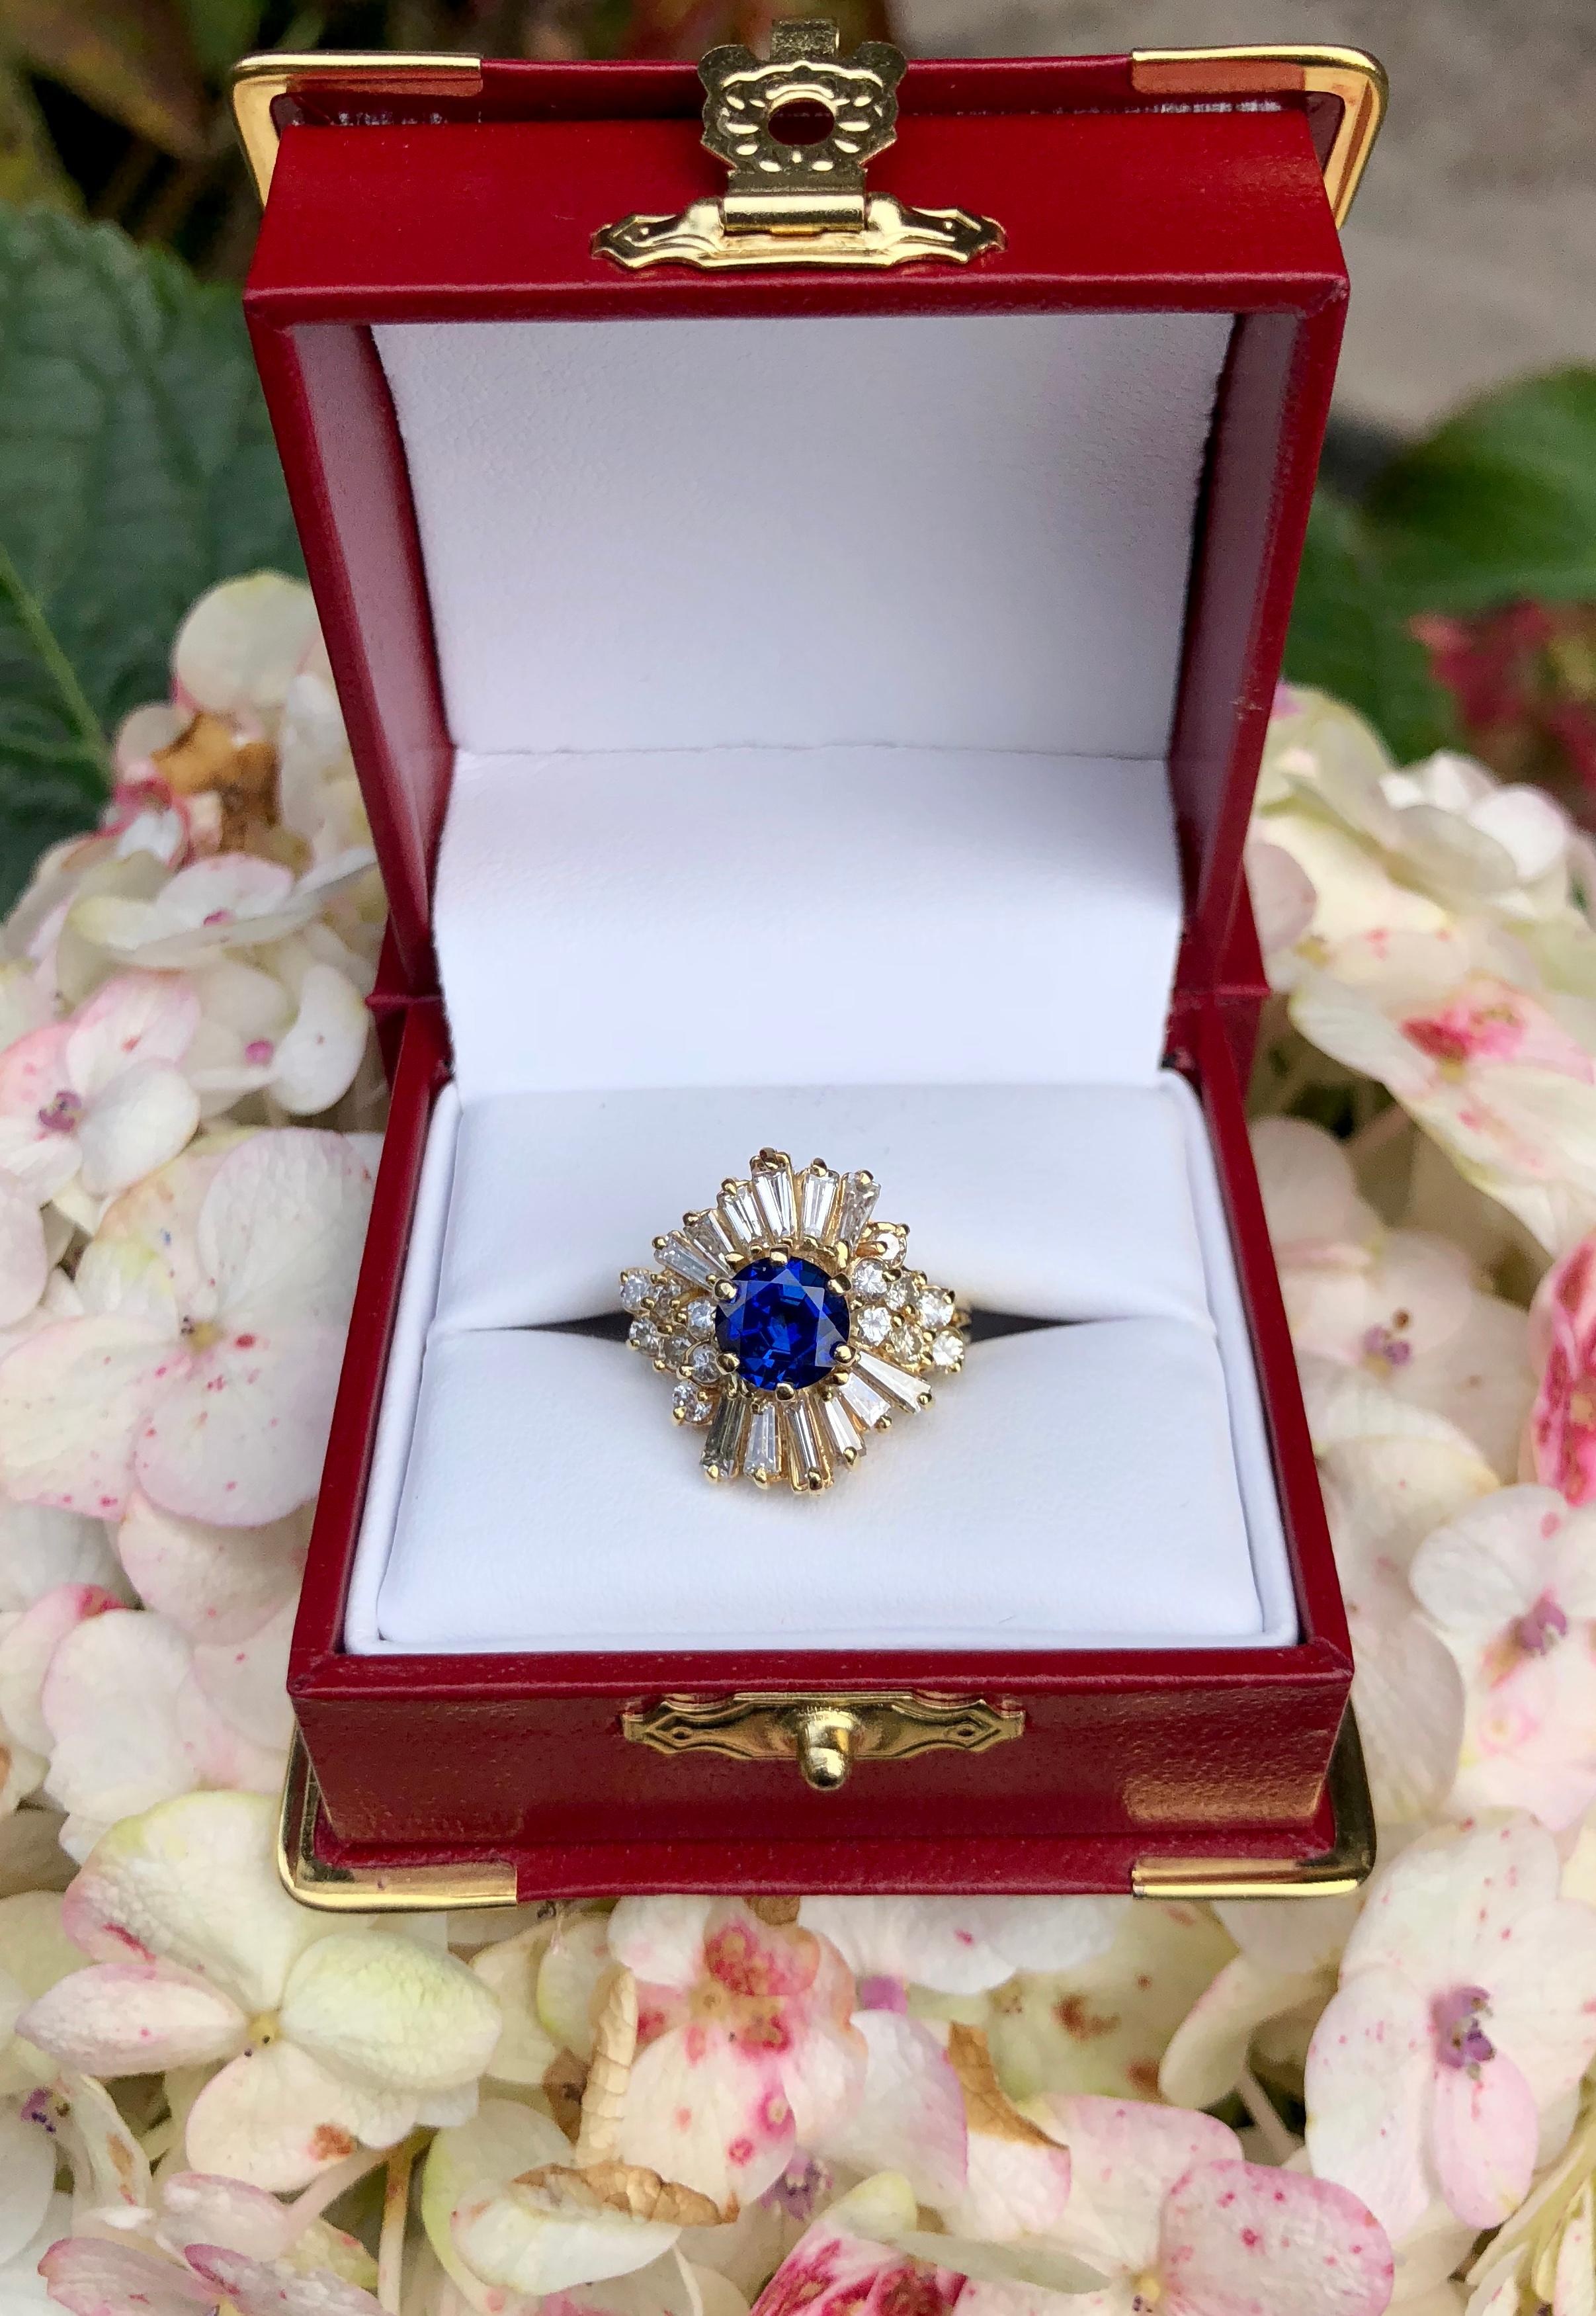 Classic ballerina style 14 karat yellow gold estate ring features a vivid, cornflower blue round blue sapphire, prong set with 6 prongs, and surrounded by 2 carats of long, prong set tapered baguettes and prong set round brilliant diamonds. Sapphire